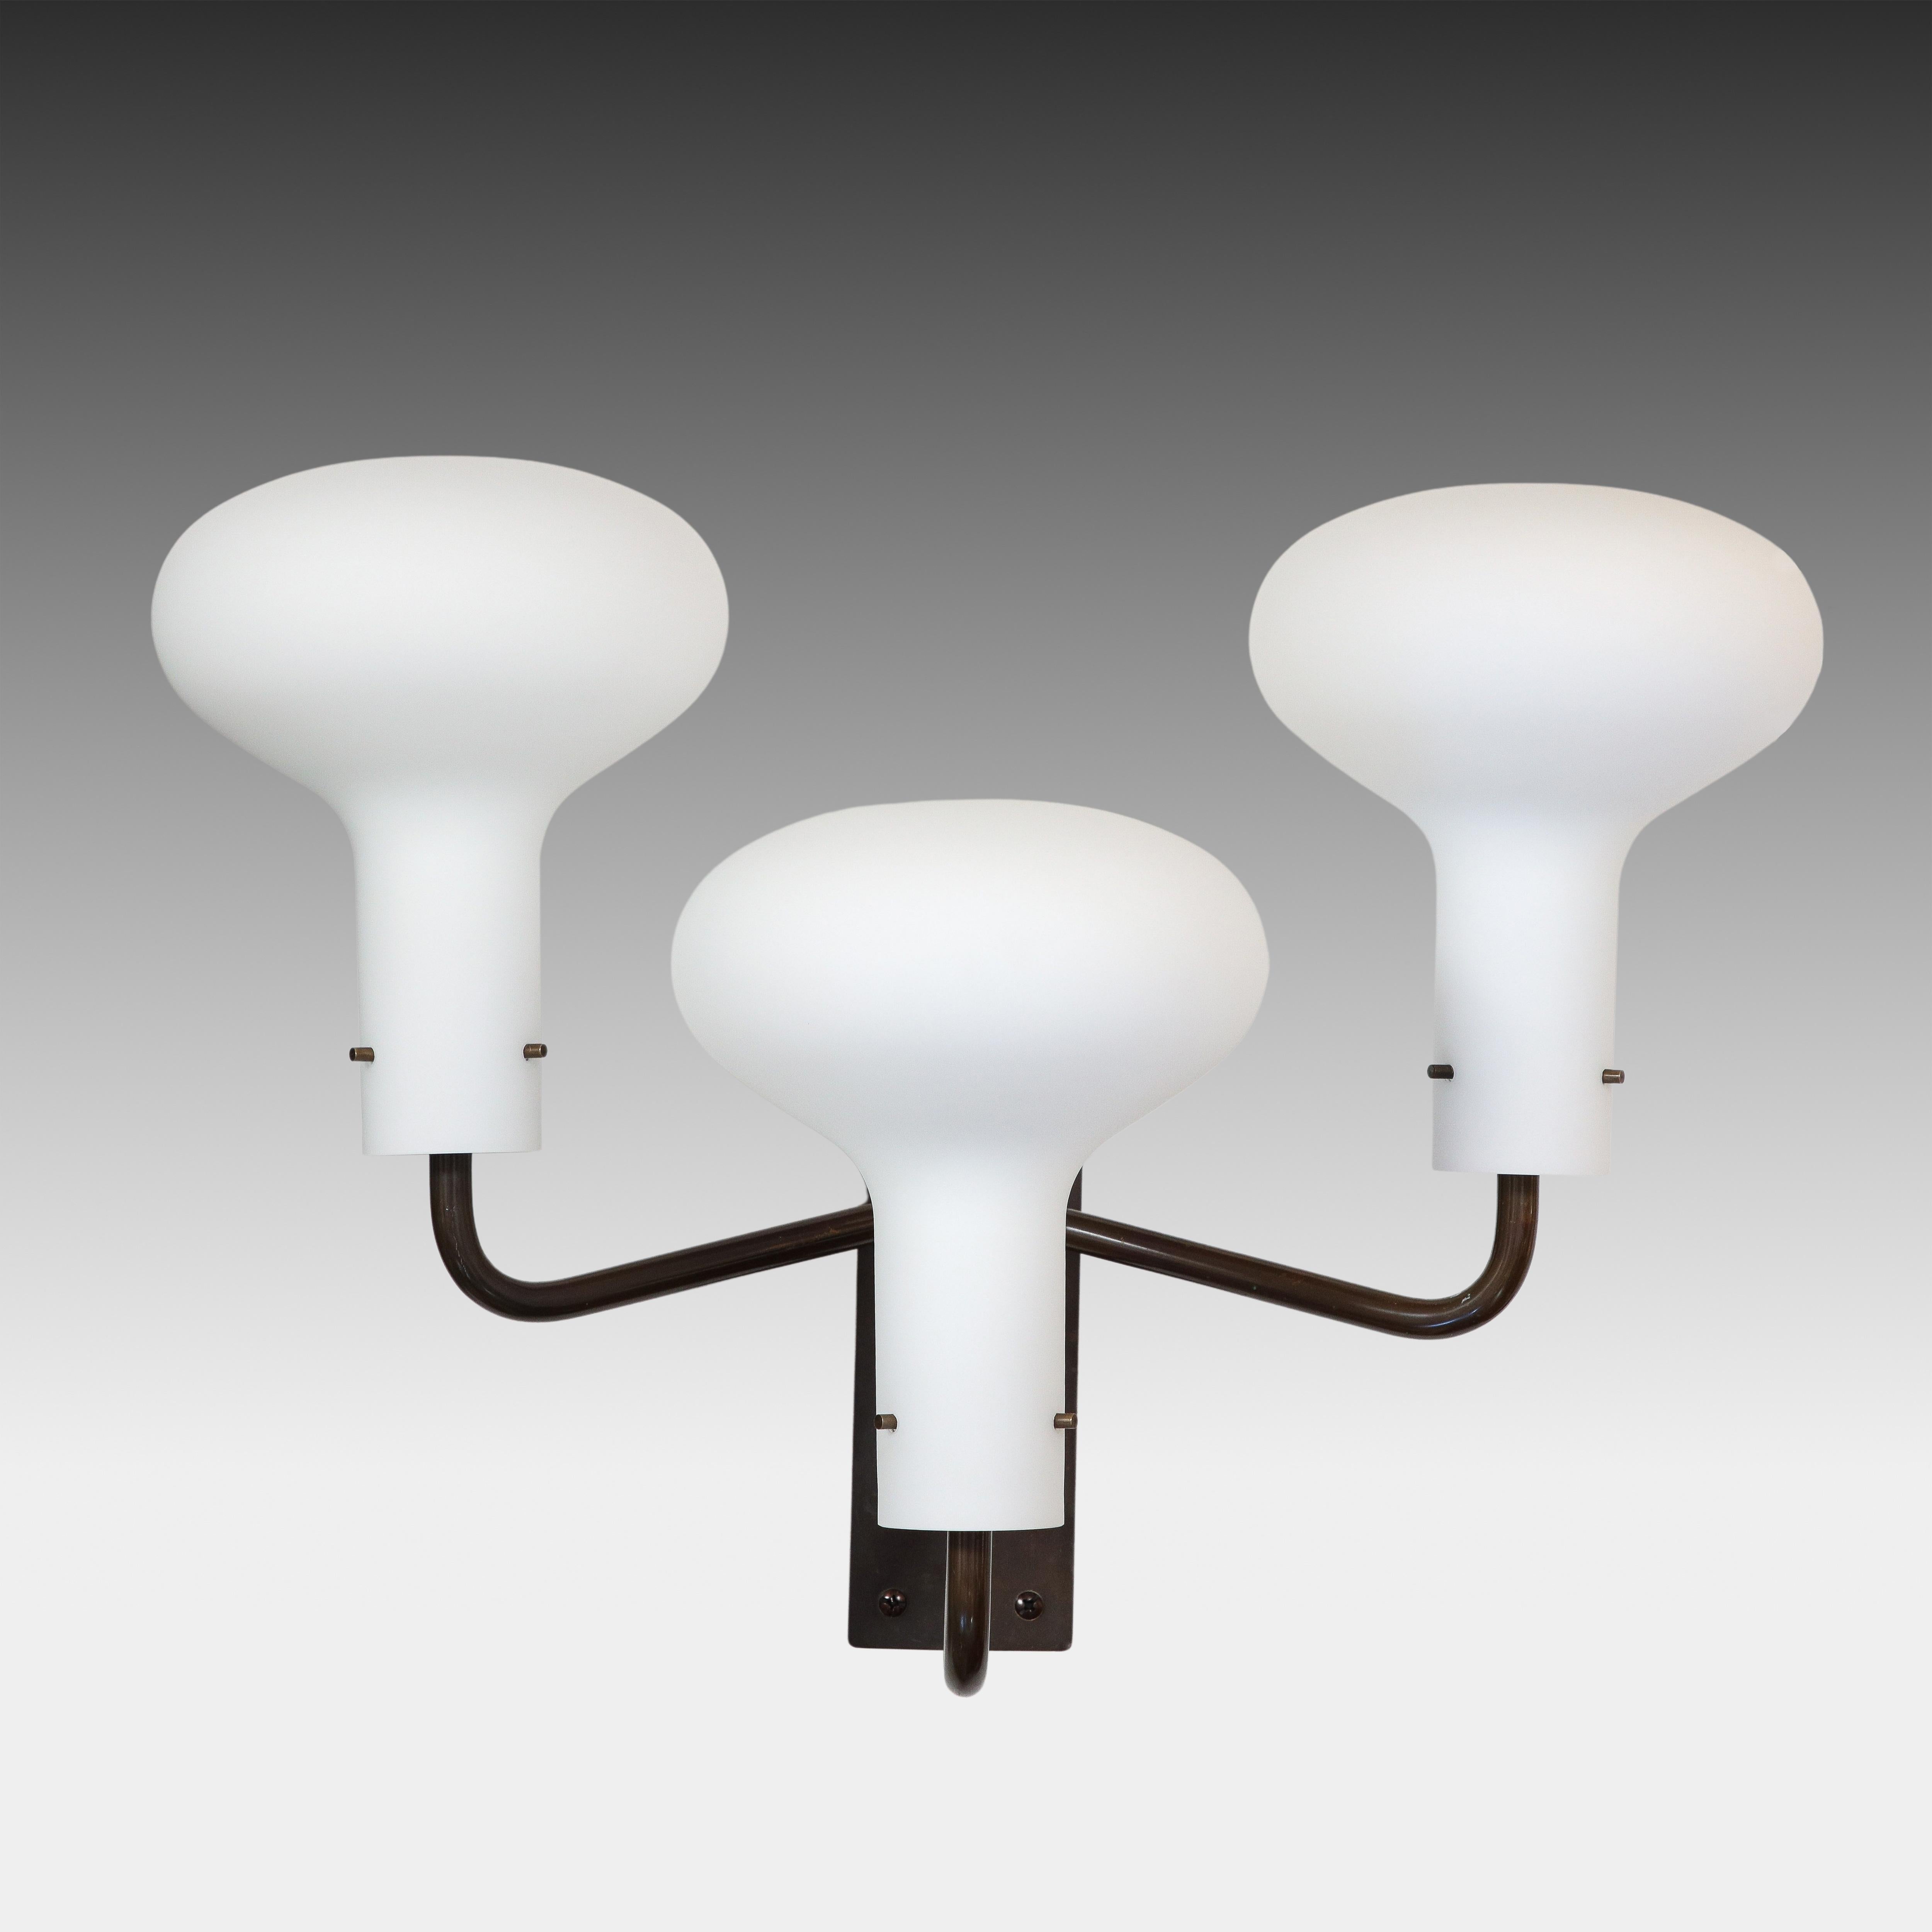 Mid-20th Century Ignazio Gardella for Azucena Pair of Three Arm Wall Lights Model LP12, 1950s For Sale